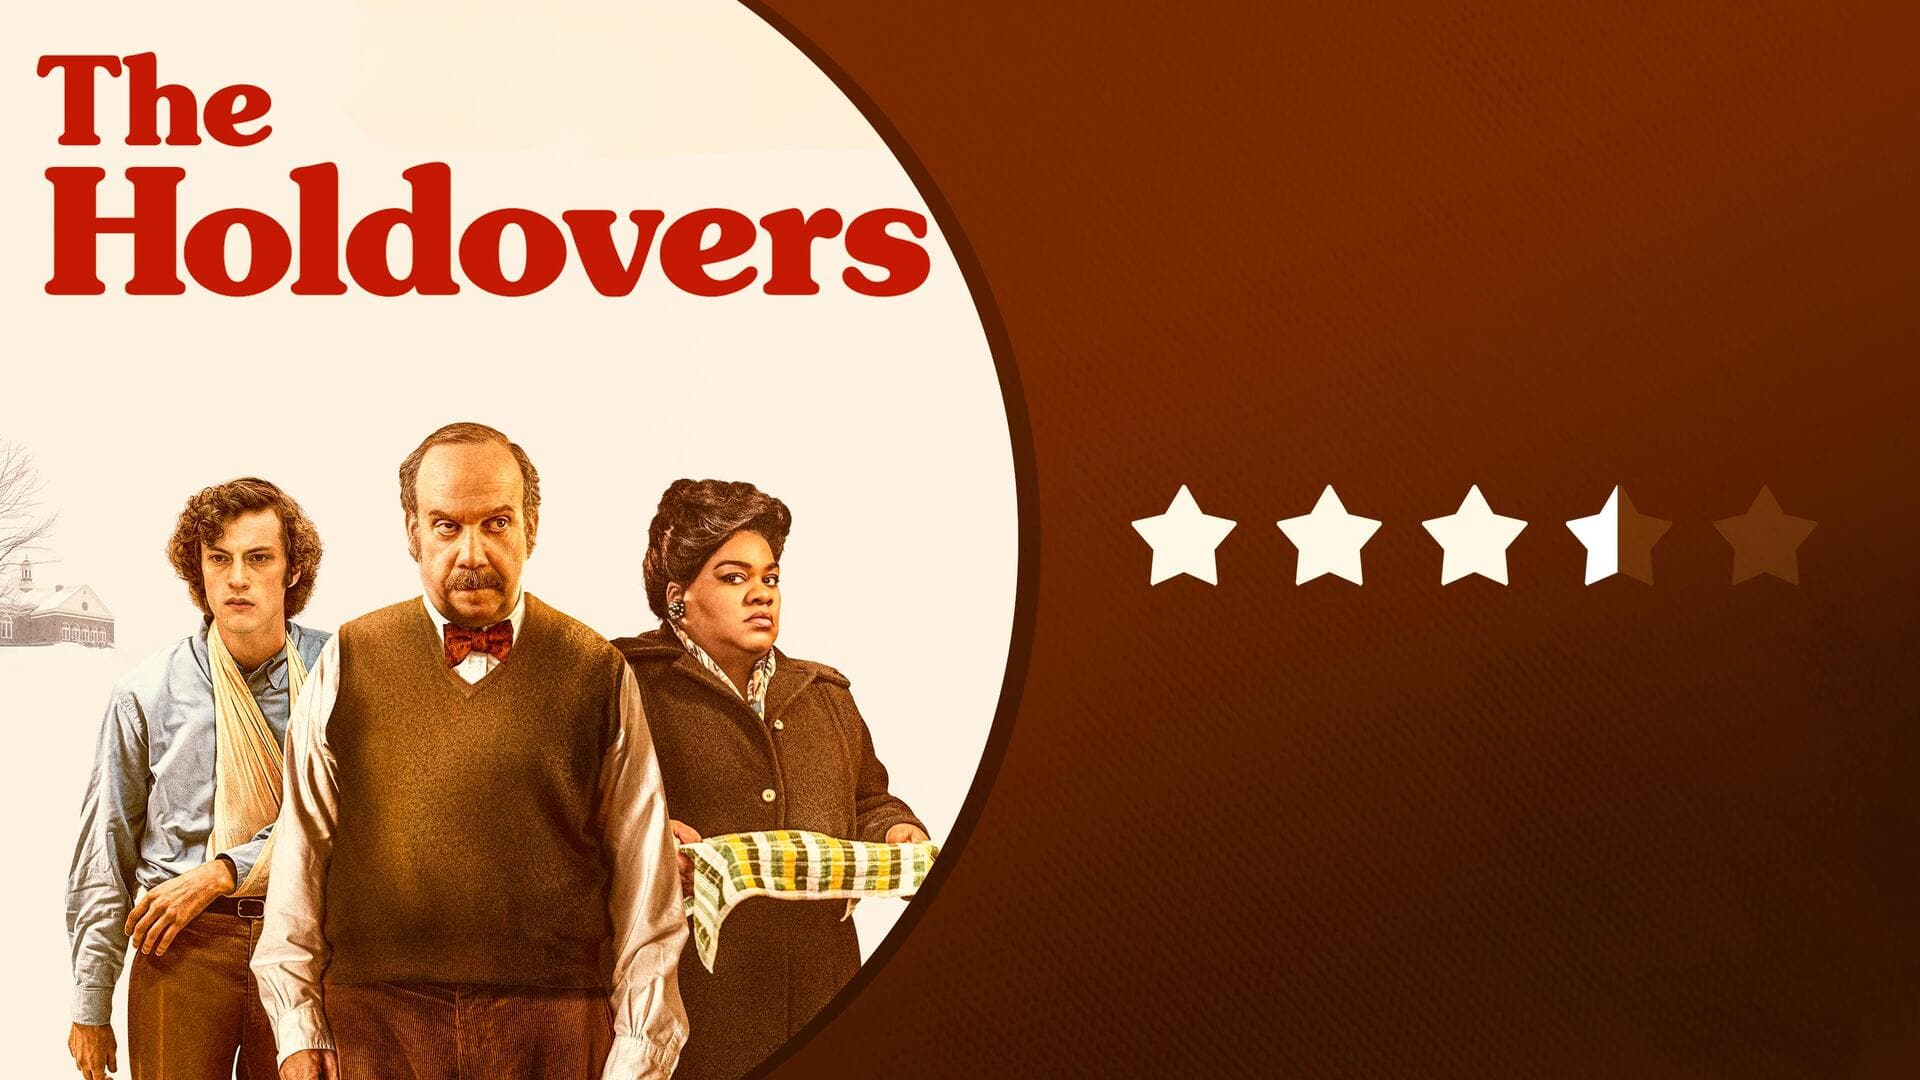 'The Holdovers' review: Endearing; moving portrait of love, life, grief